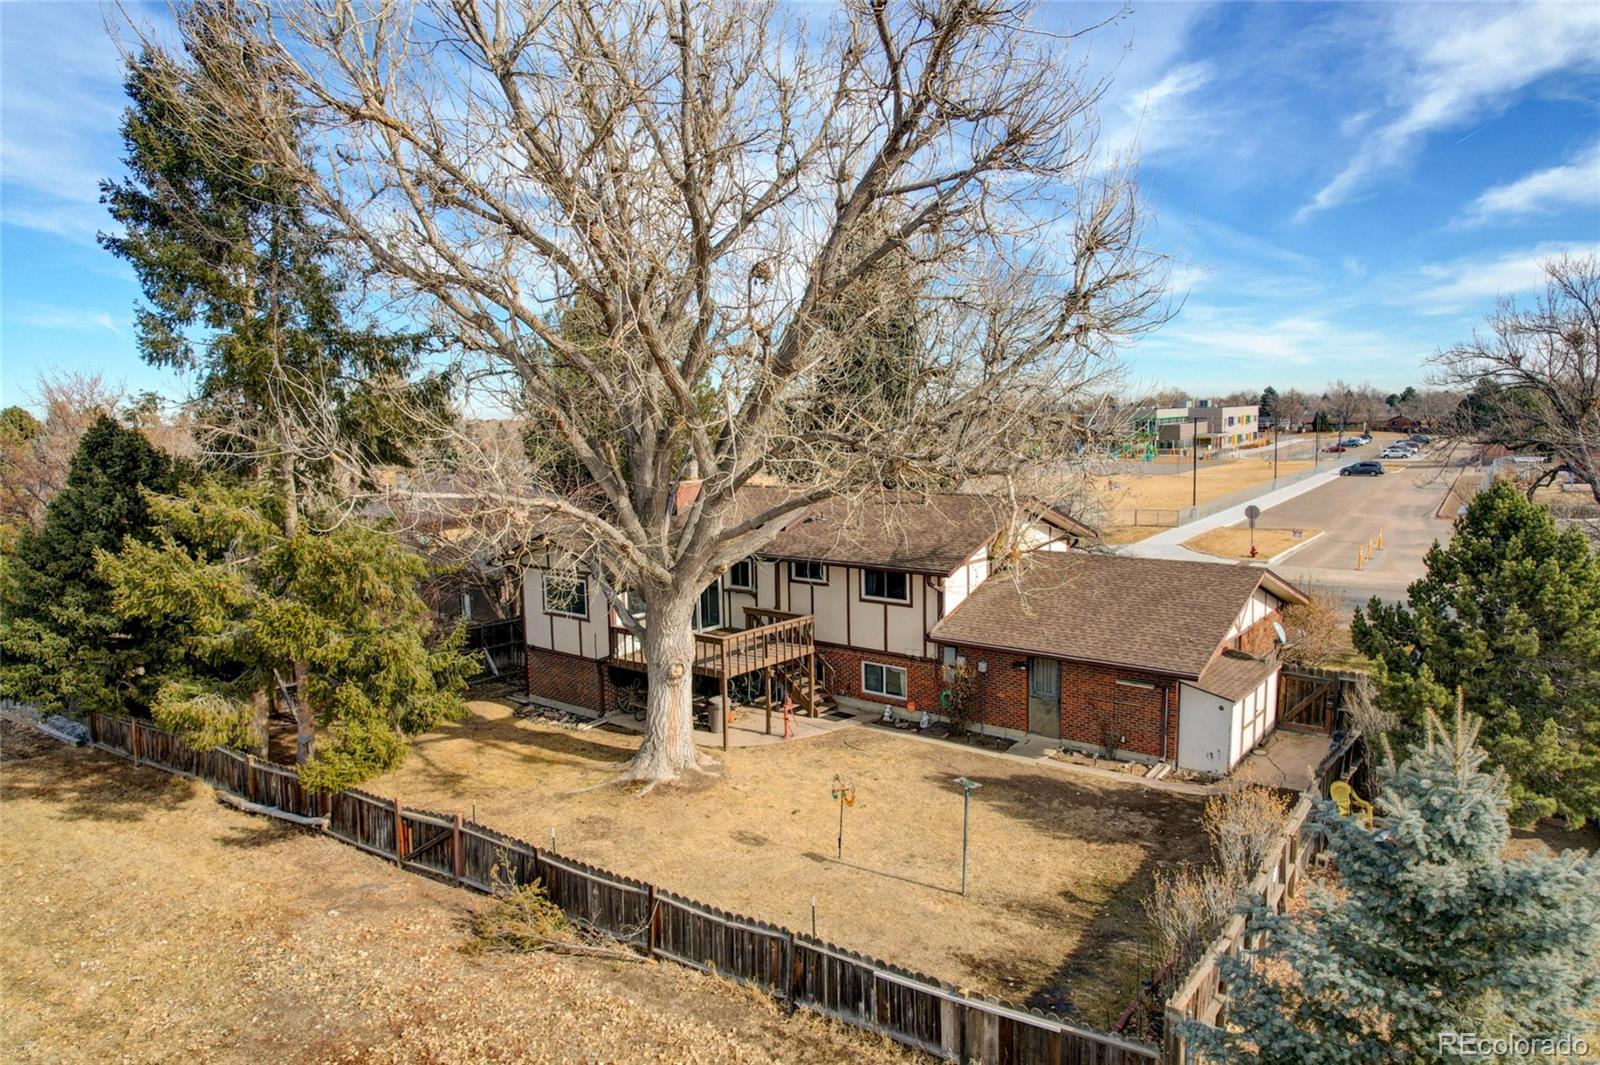 Report Image for 1375 S Hoyt Street,Lakewood, Colorado